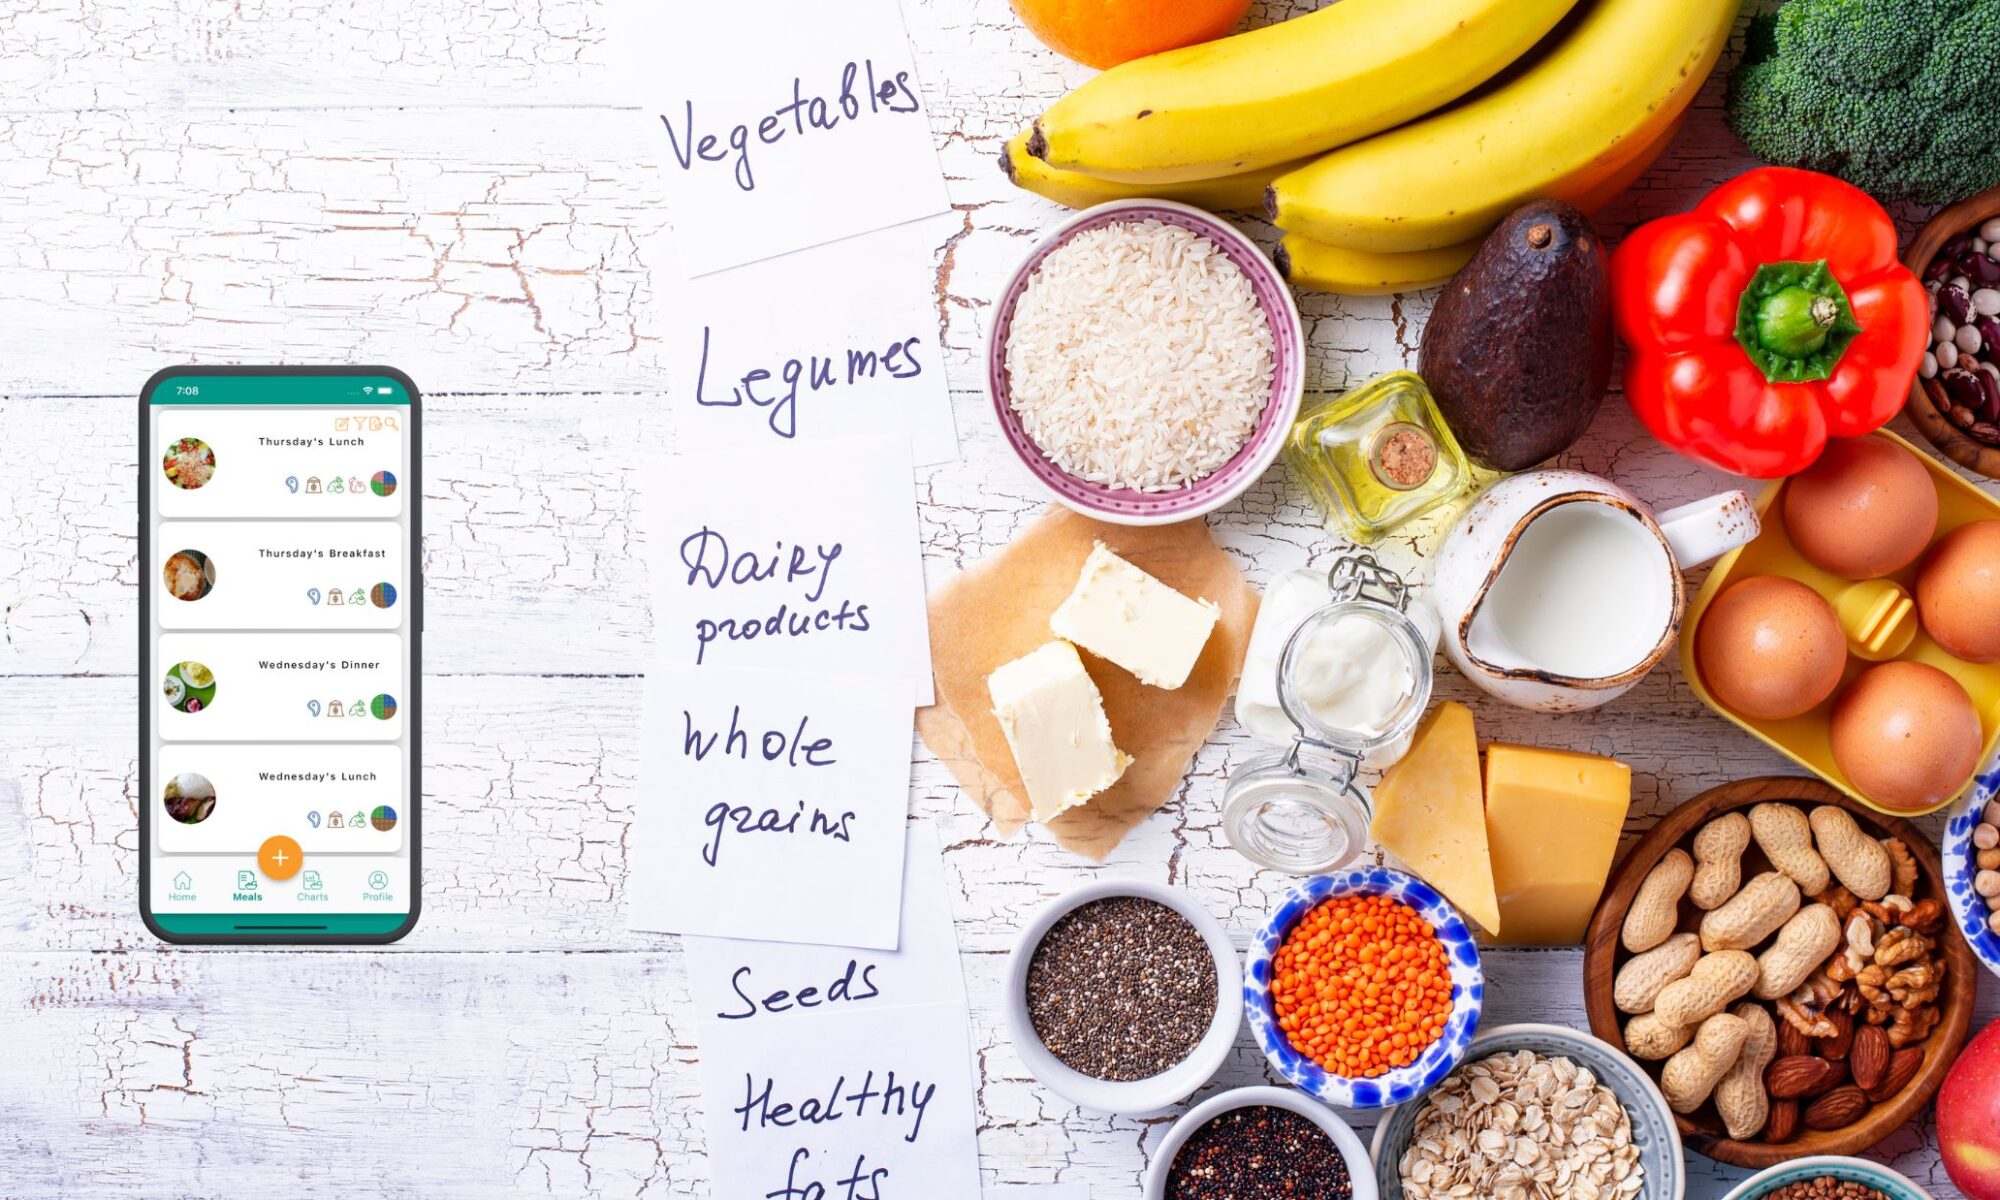 A smartphone showcasing the JustaPlate meal tracker app alongside a vibrant assortment of nutritious foods, each labeled with their respective category: vegetables, legumes, dairy products, whole grains, seeds, and healthy fats.